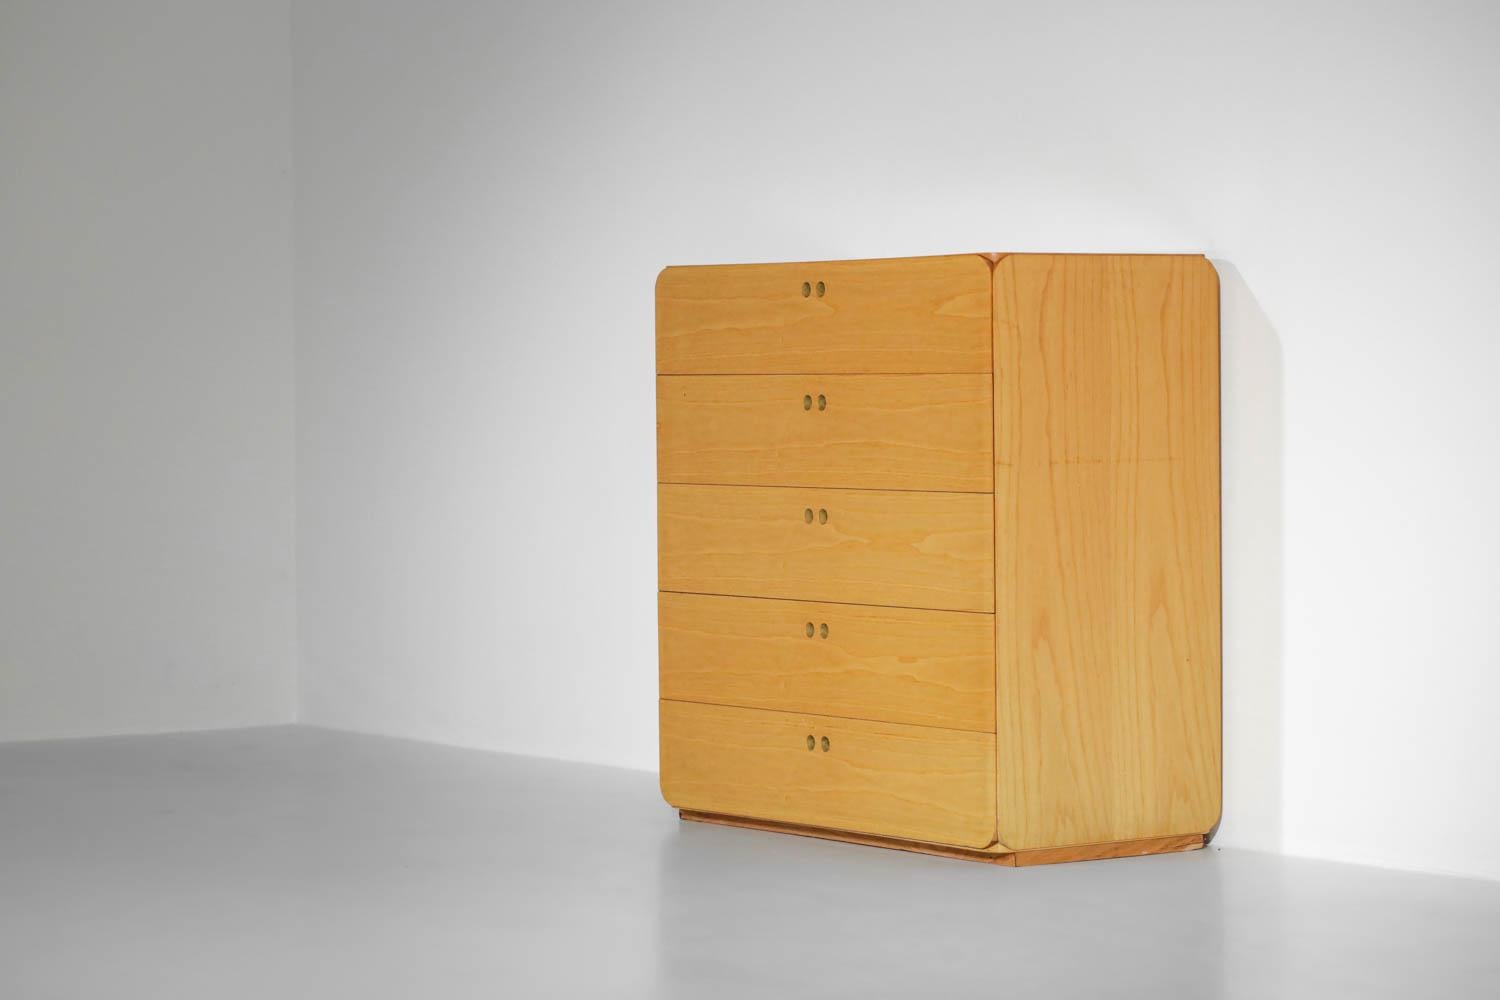 Dutch vintage bookcase from the 70's / 80's by designer Drek Jan de Vries. This bookcase is in two independent parts: the upper part with the showcase and the lower part like a chest of drawers with five drawers. The whole is made of solid beech and